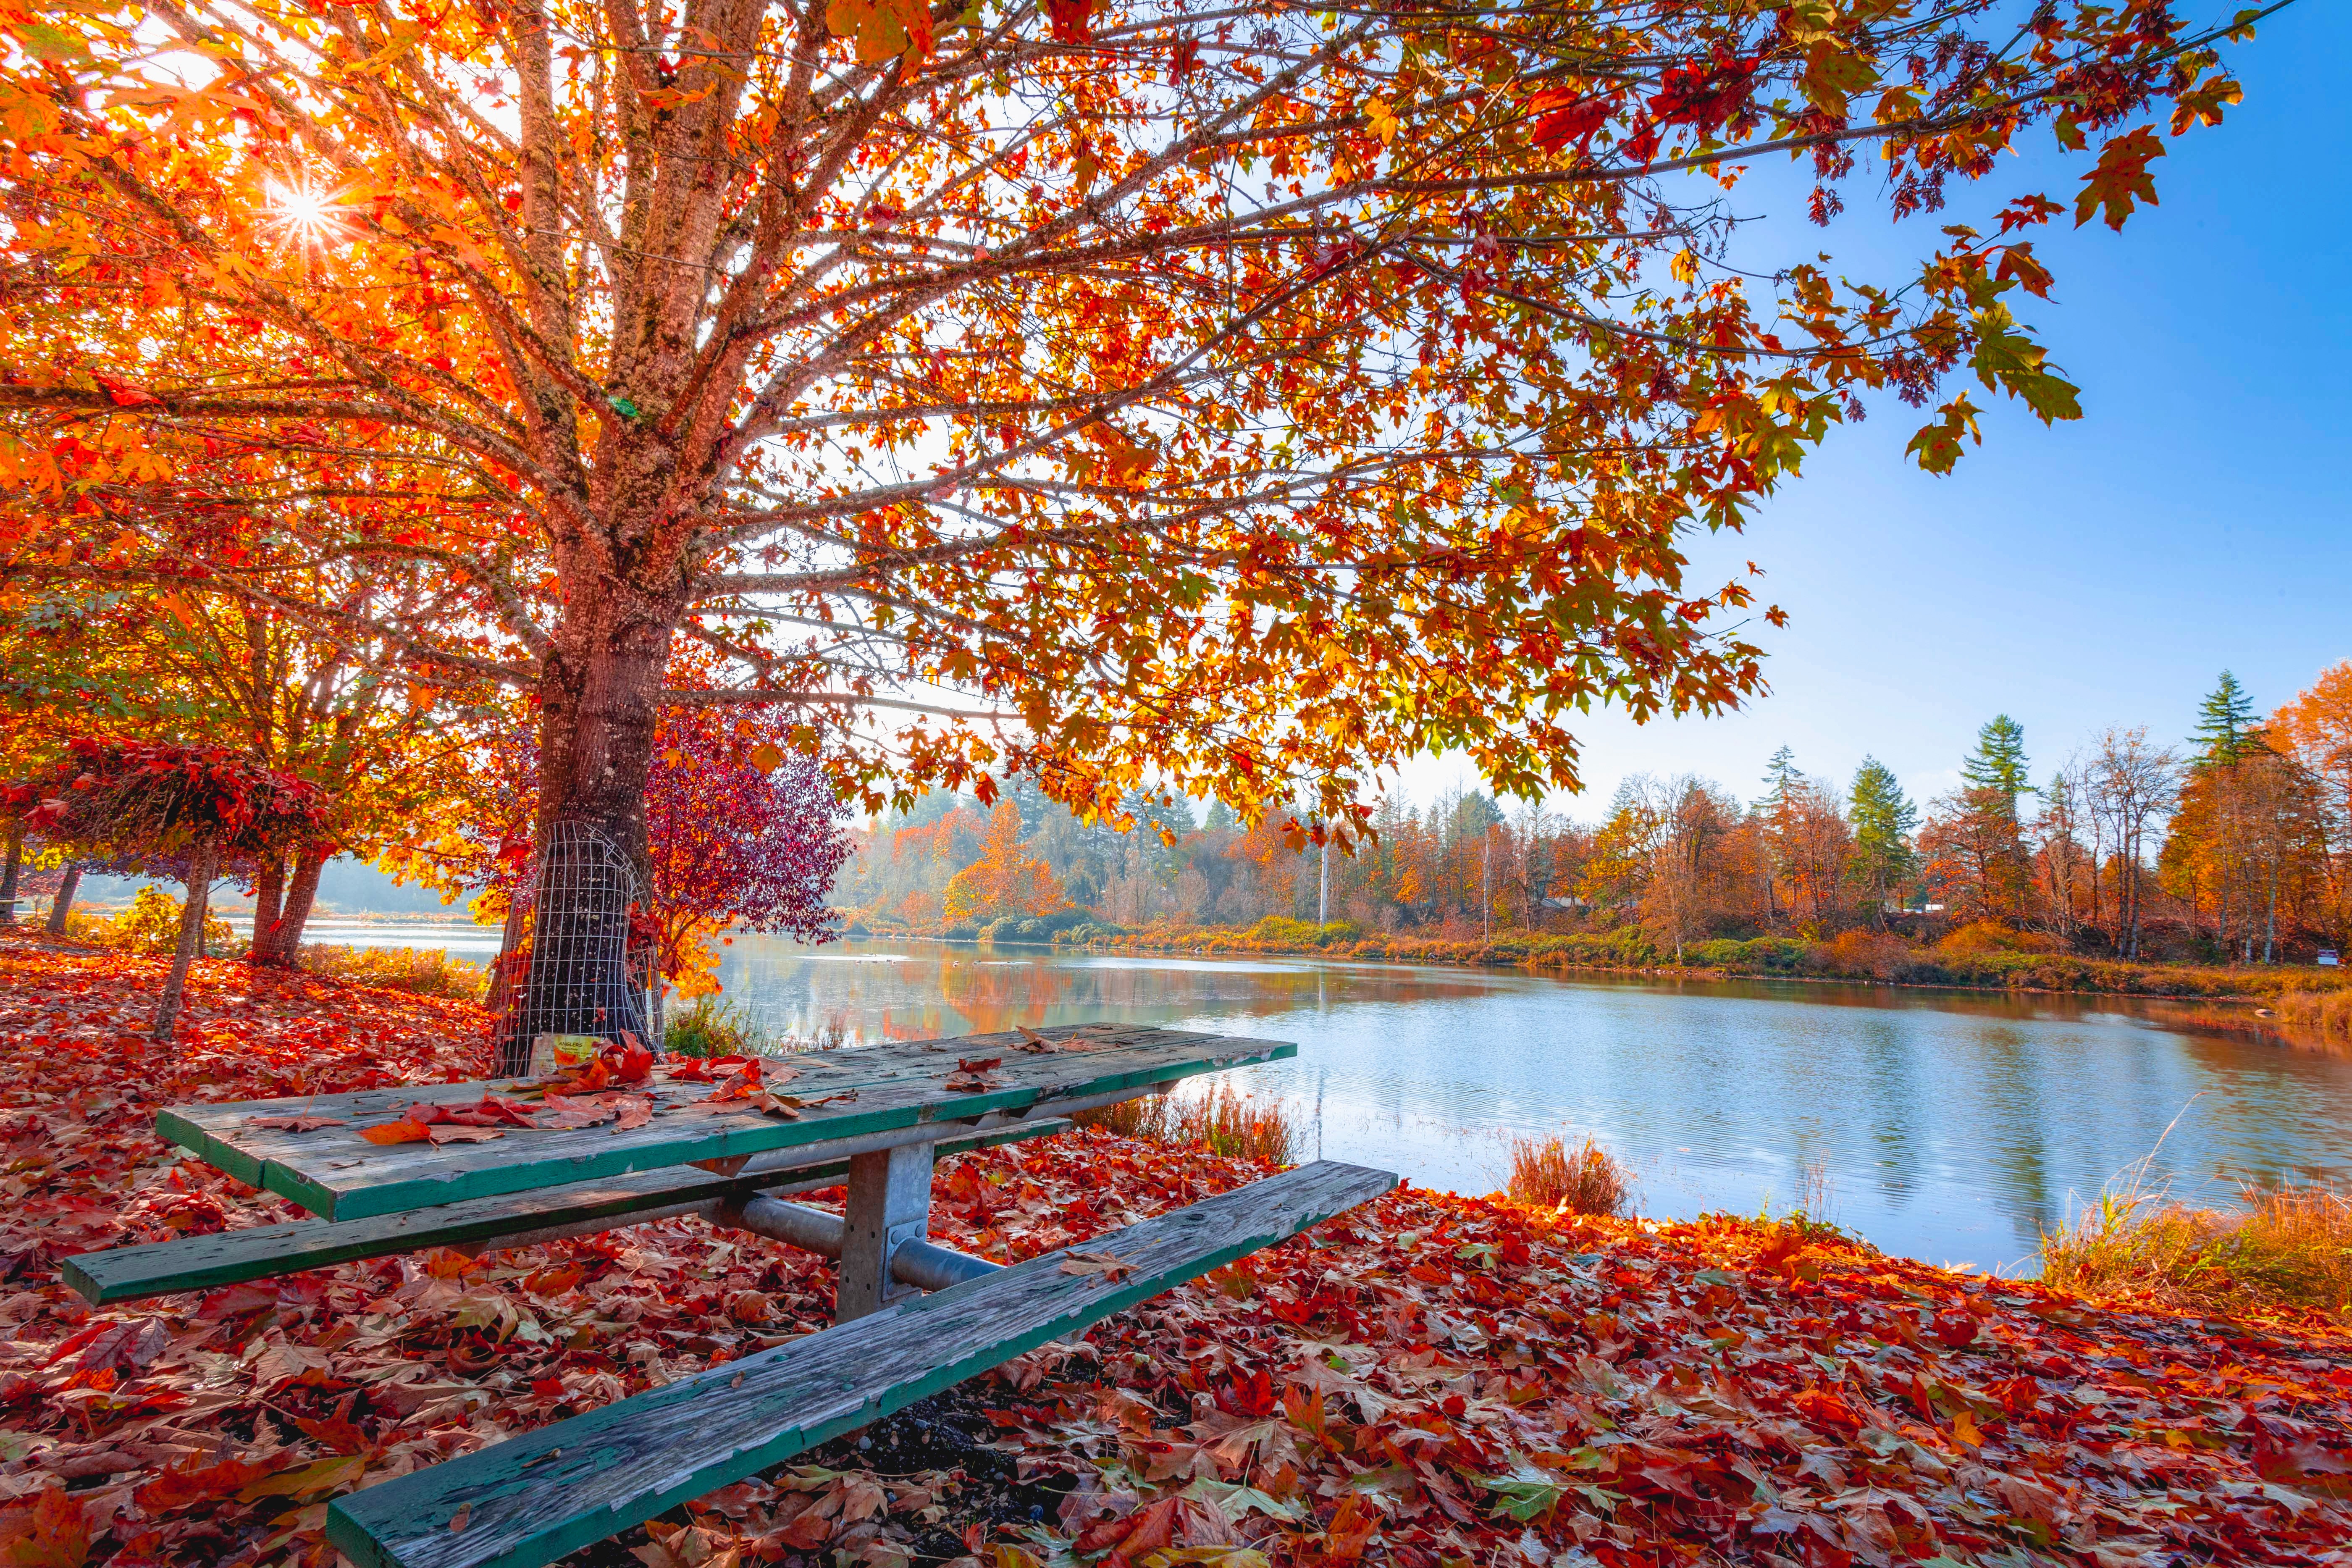 Red and Orange Autumn Leaves on the Ground and on Trees Beside Body of Water · Free Stock Photo